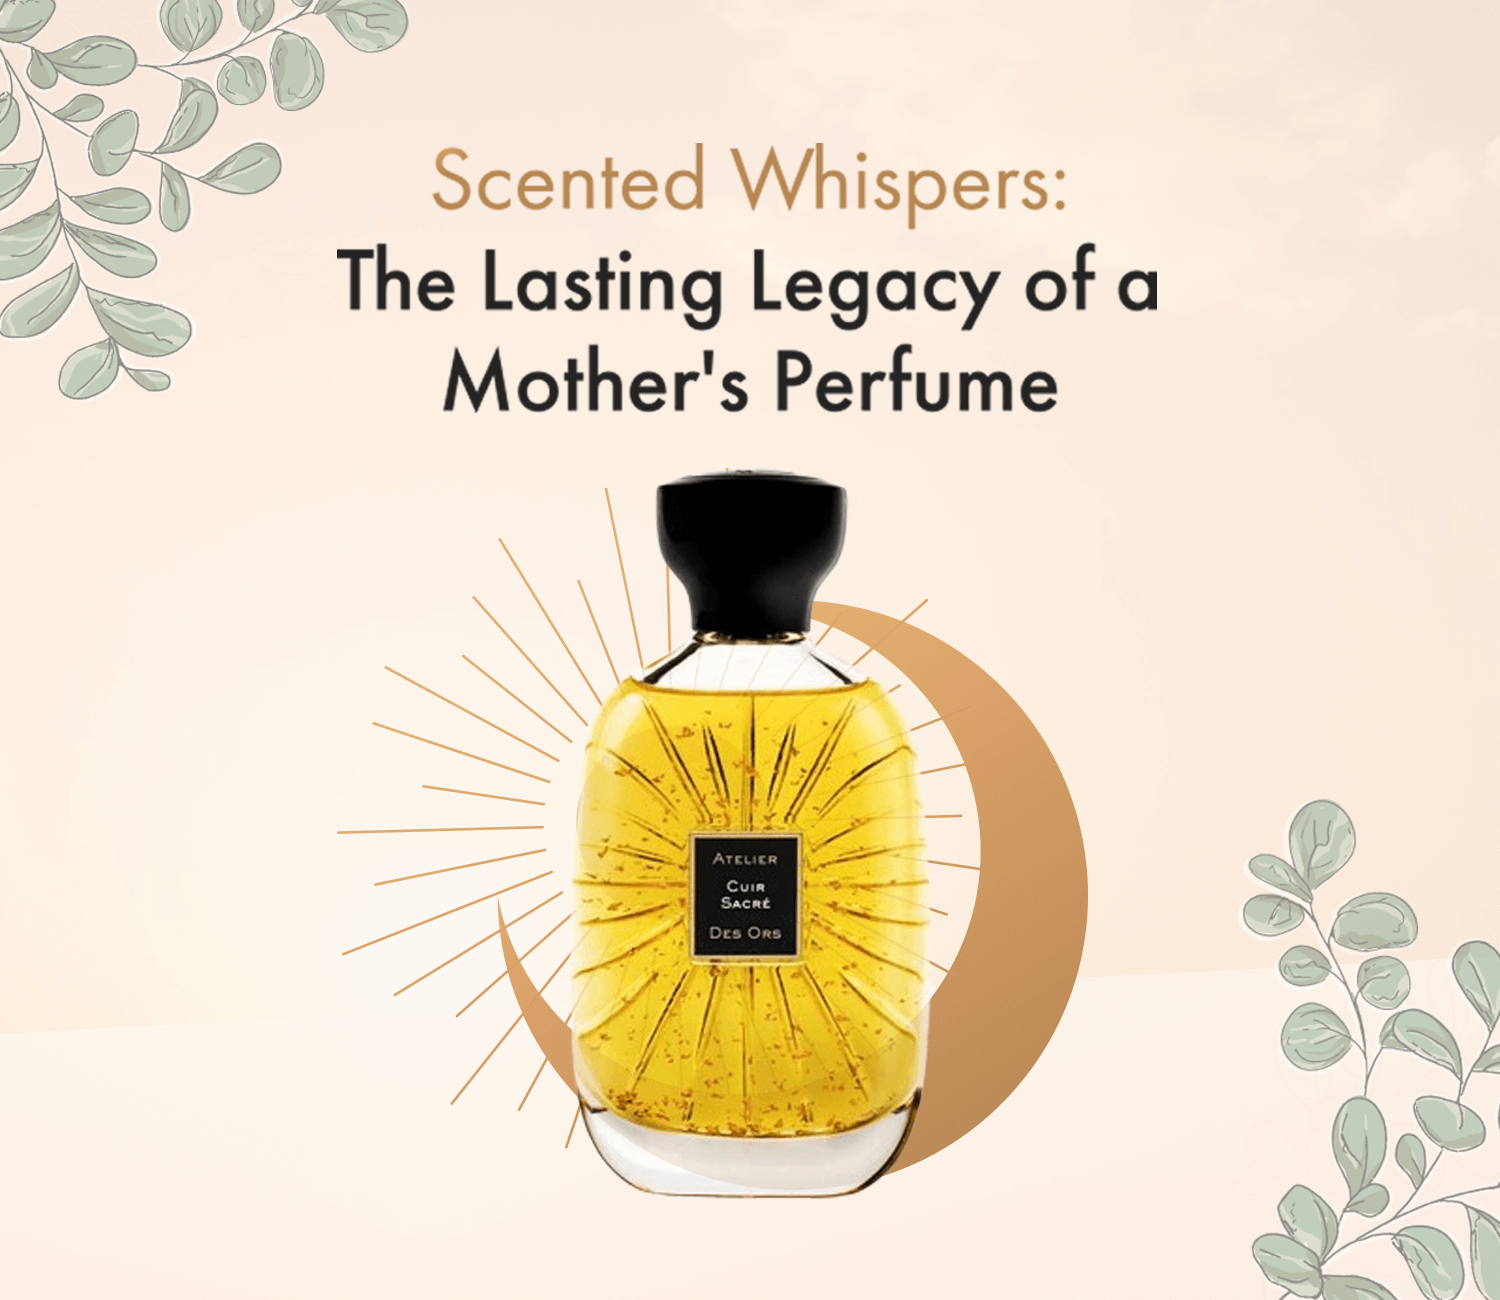 Scented Whispers: The Lasting Legacy of a Mother's Perfume